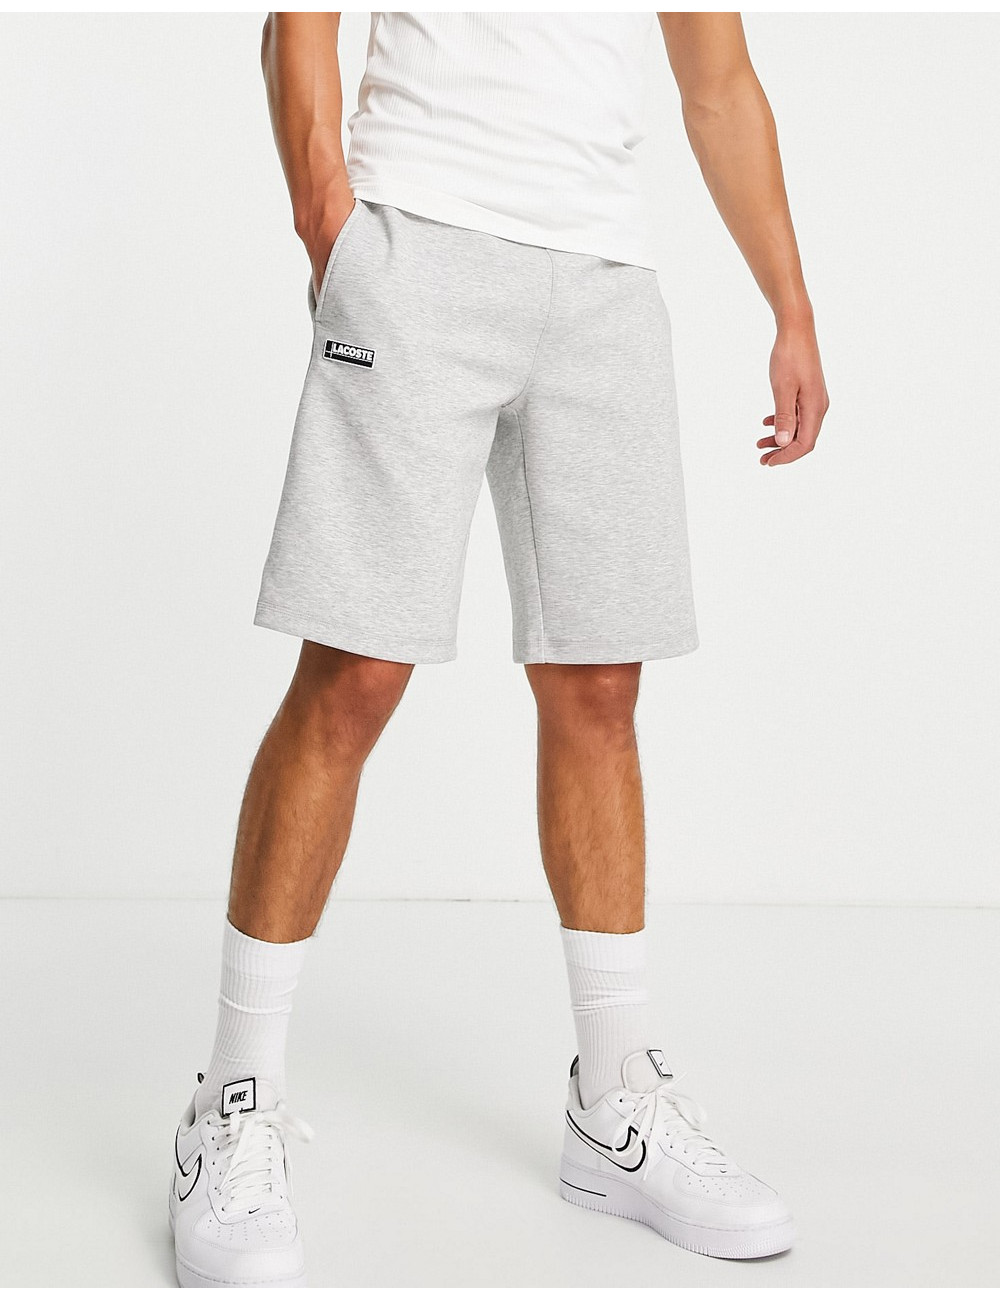 Lacoste jersey shorts